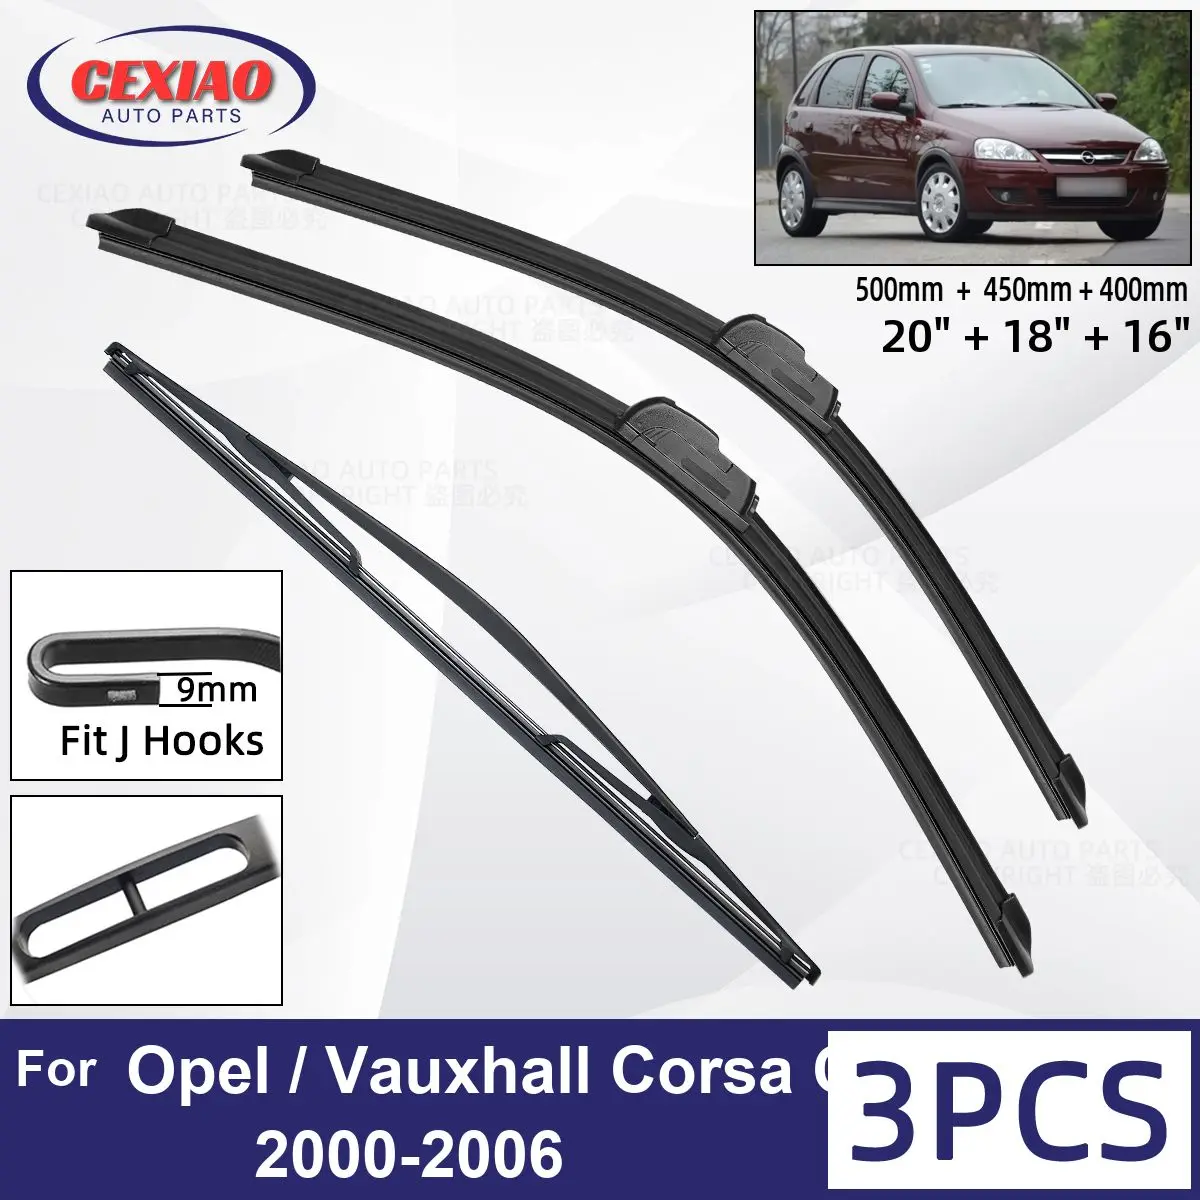 

For Opel / Vauxhall Corsa C 2000-2006 Car Front Rear Wiper Blades Soft Rubber Windscreen Wipers Auto Windshield 20"+18"+16" 2005